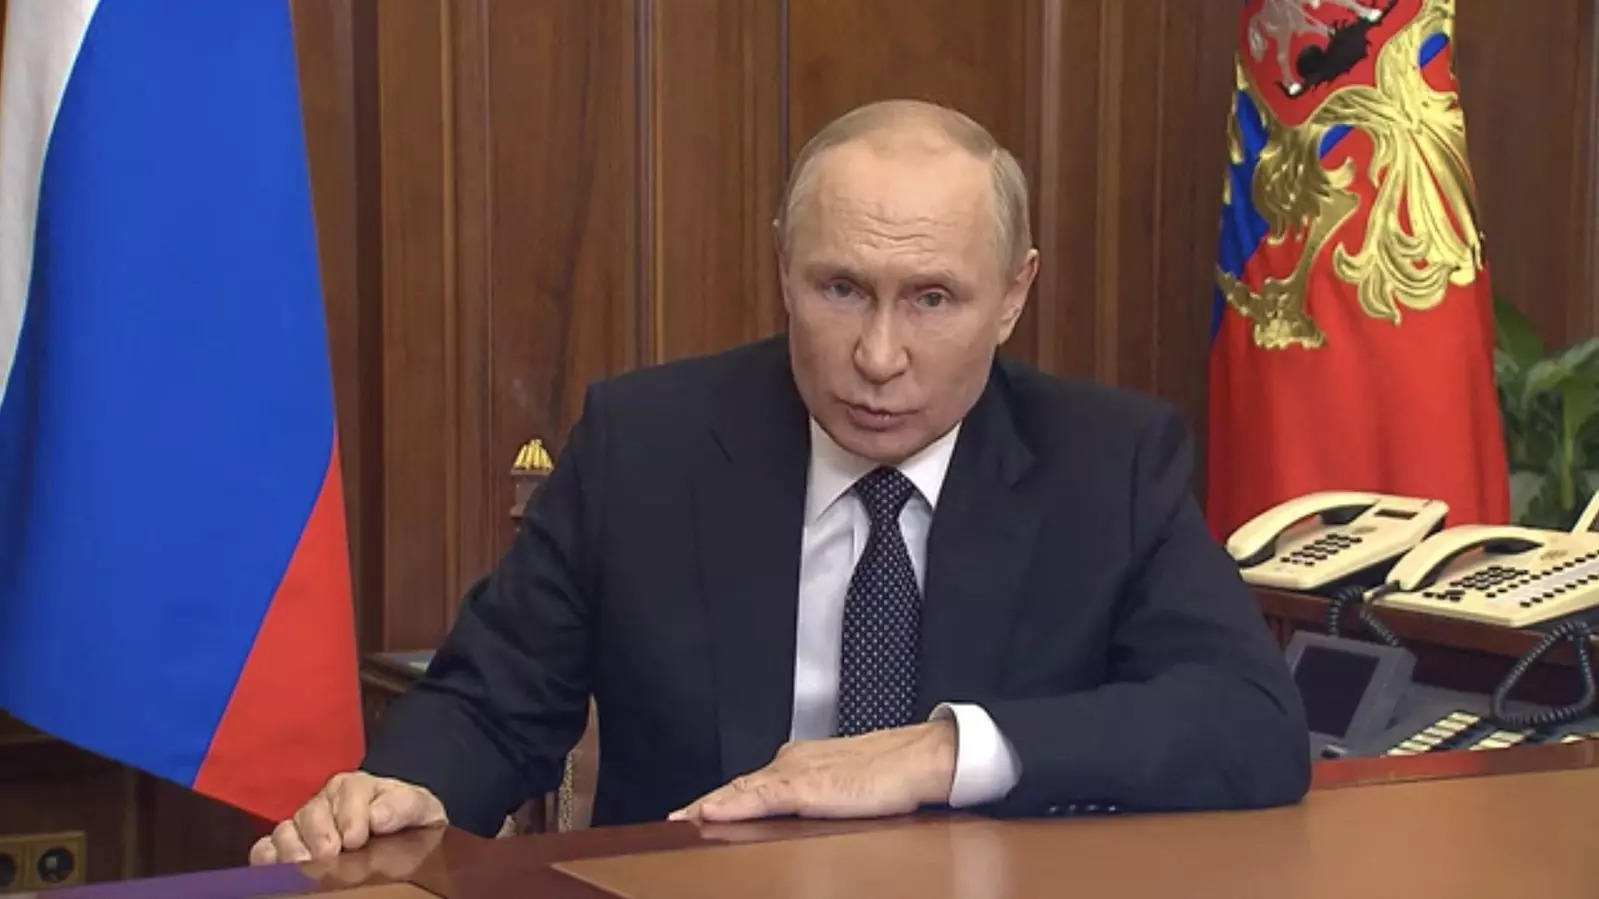 Putin says conflicts in Ukraine, ex-USSR are 'result of Soviet collapse'